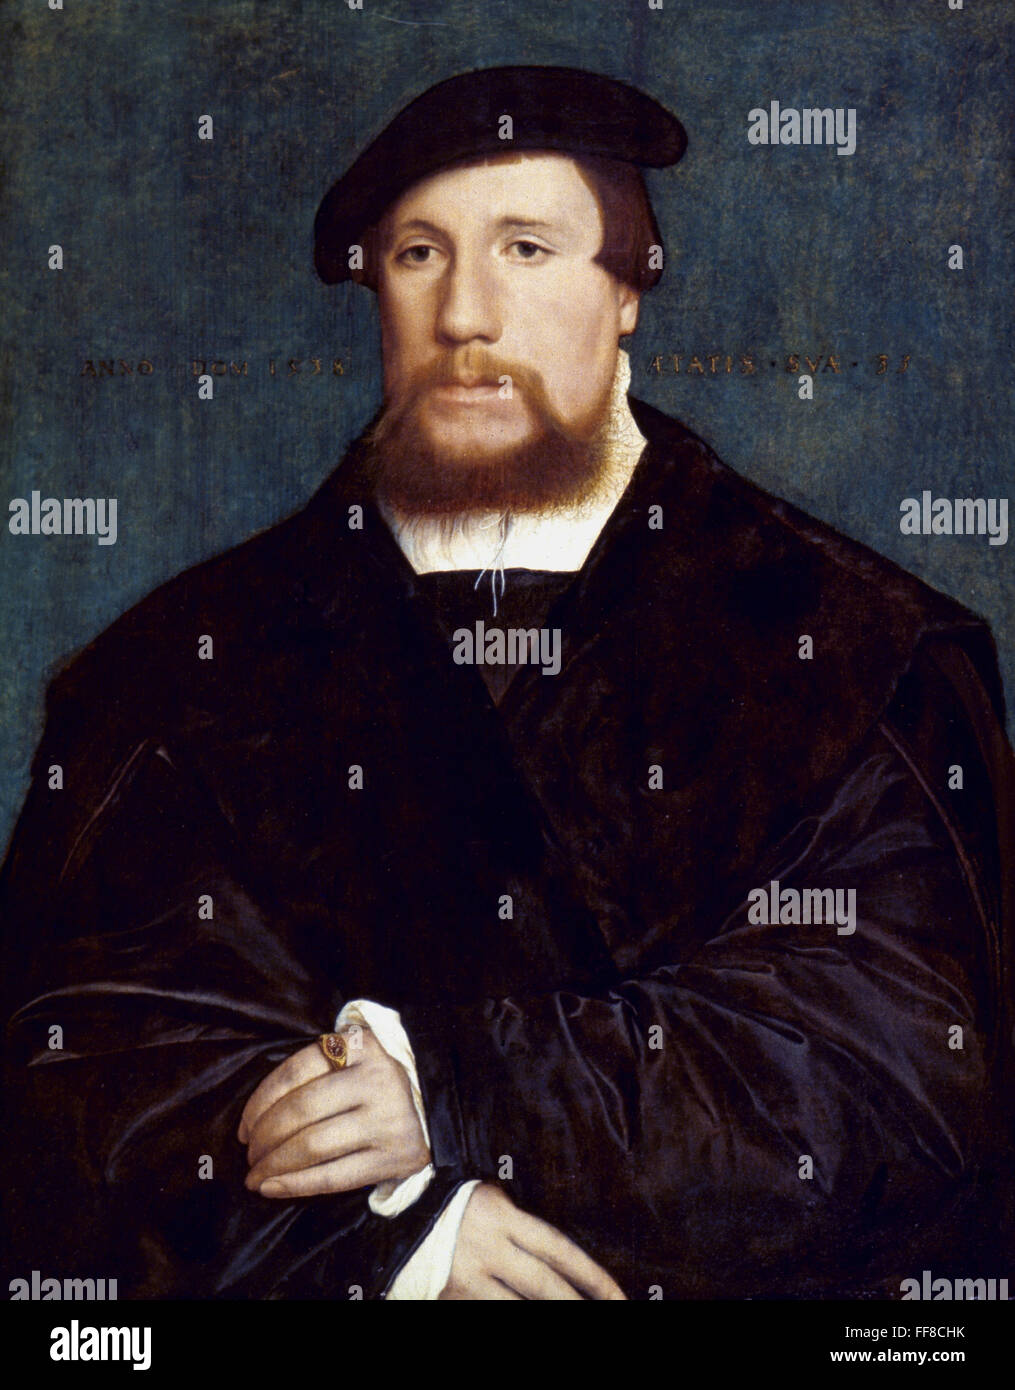 HOLBEIN: MERCHANT, 1538. /nA Merchant of the Hanseatic League, by Hans Holbein the Younger. Oil on panel, 1538. Stock Photo